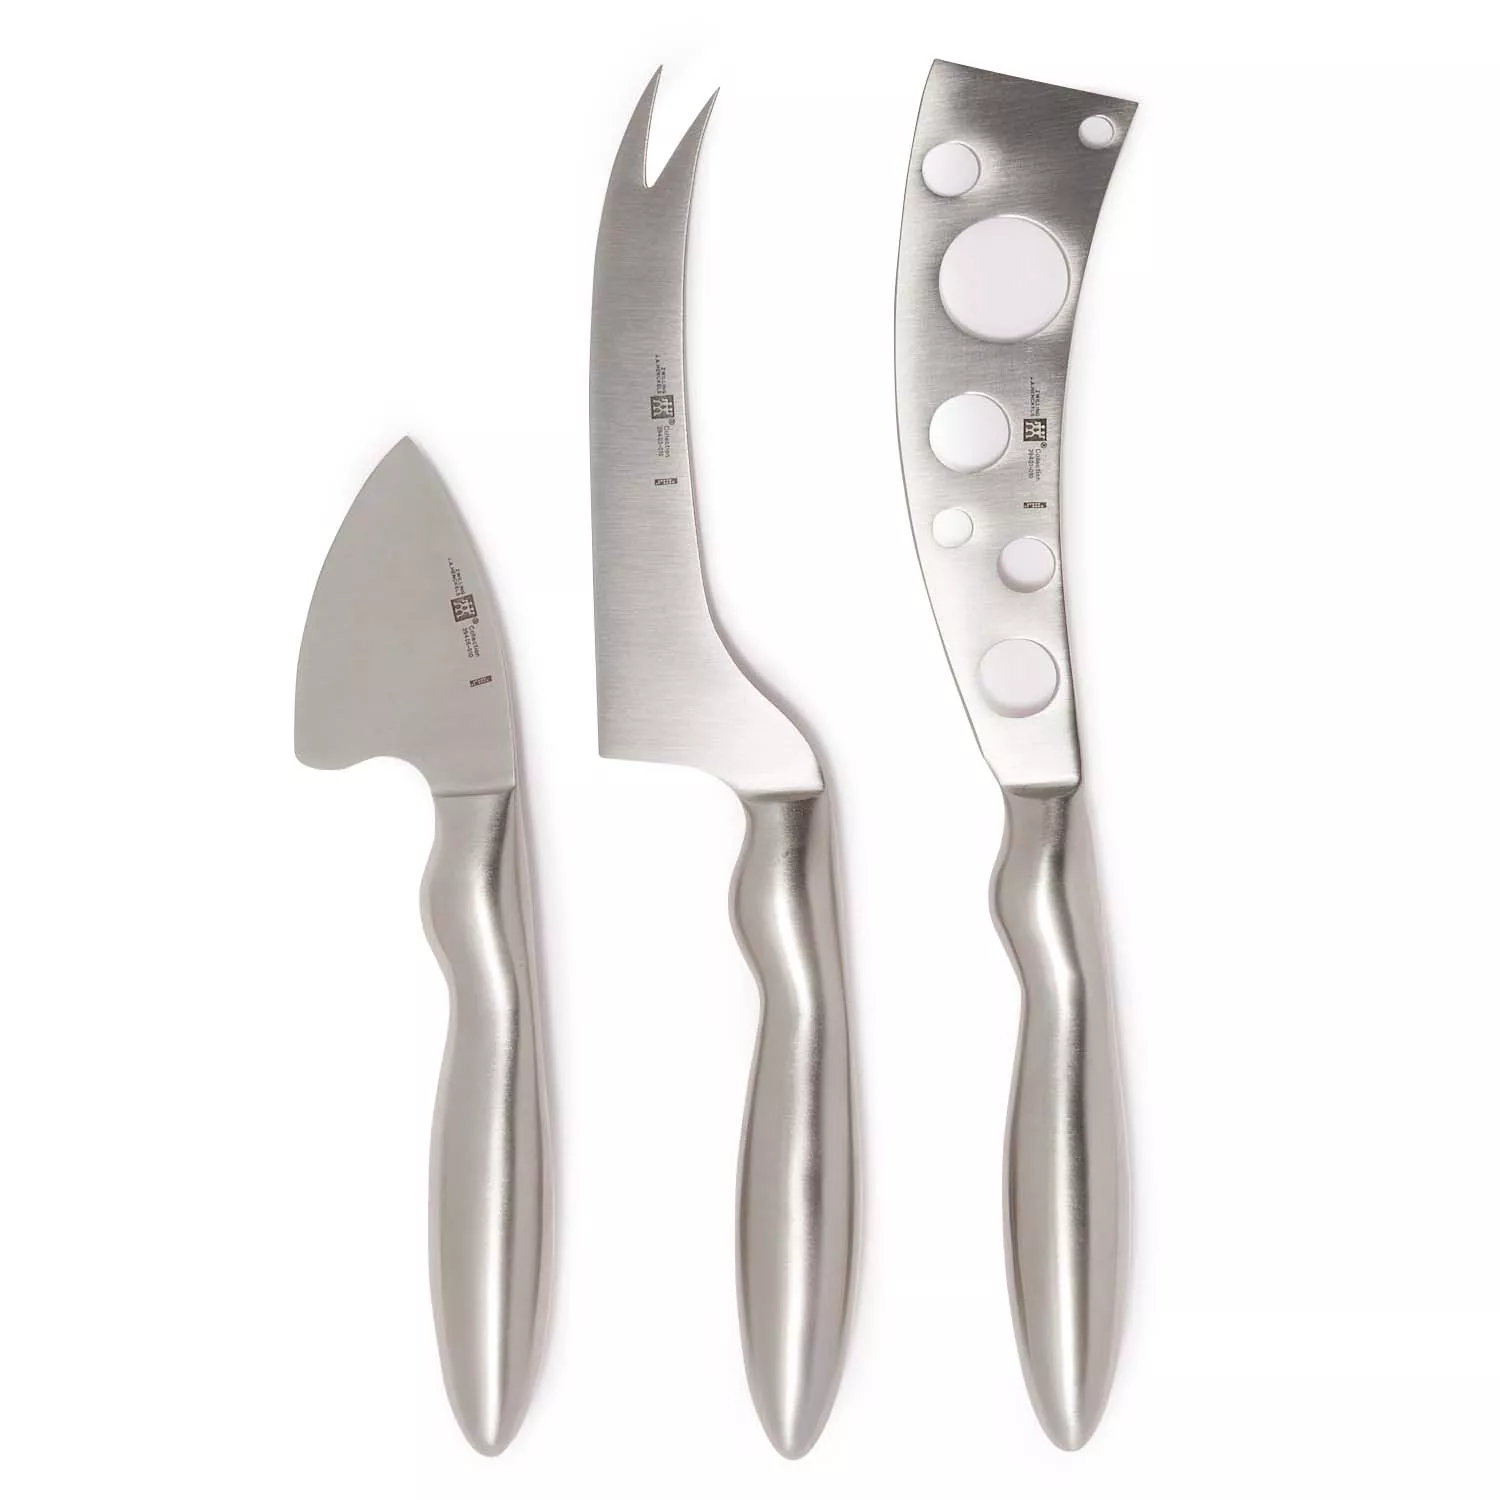 ZWILLING J.A. Henckles Collection 3 Piece Cheese Knife Set Stainless Steel.  NIB